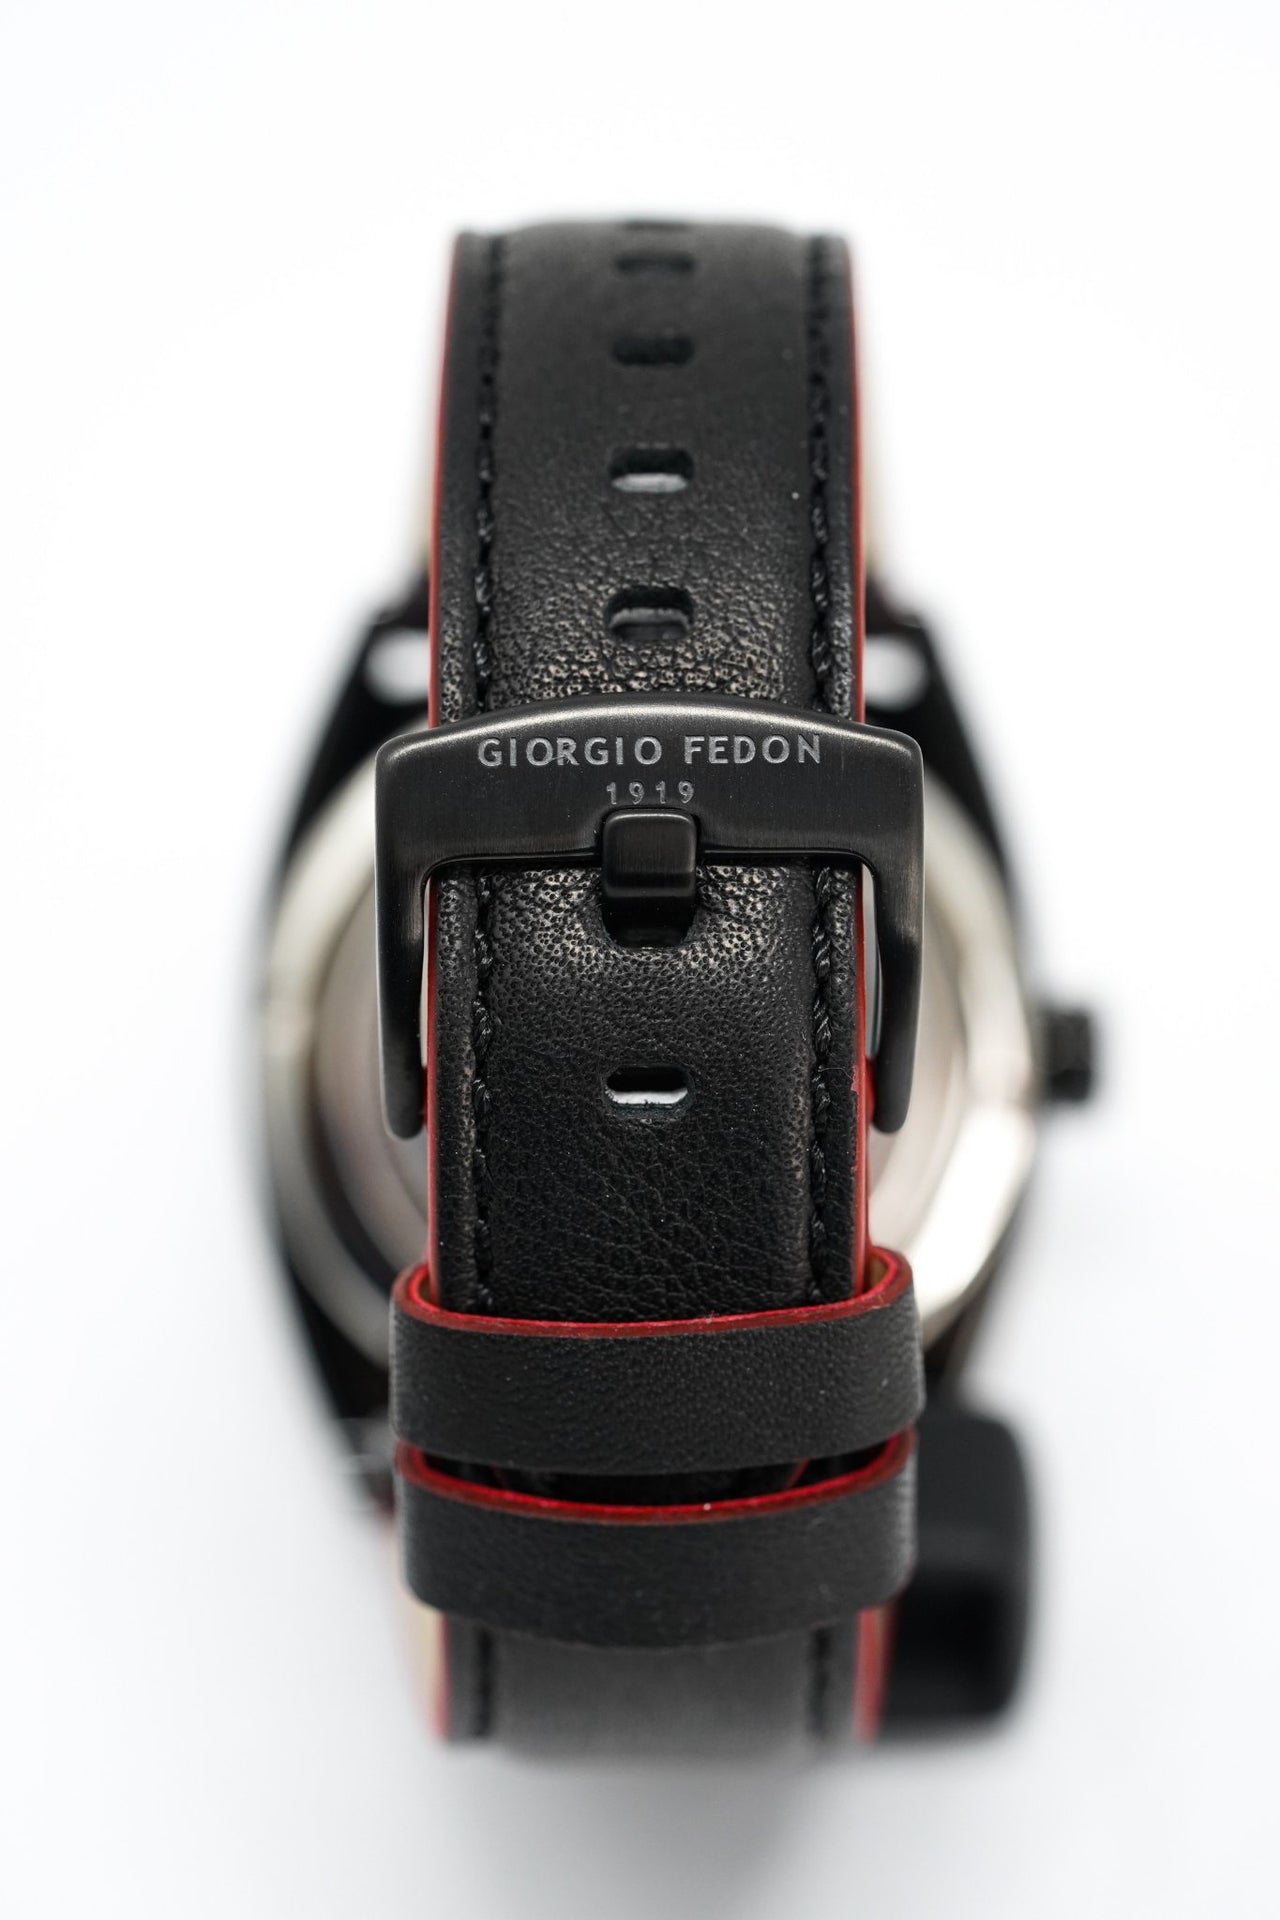 Giorgio Fedon Legend Red Black PVD - Watches & Crystals